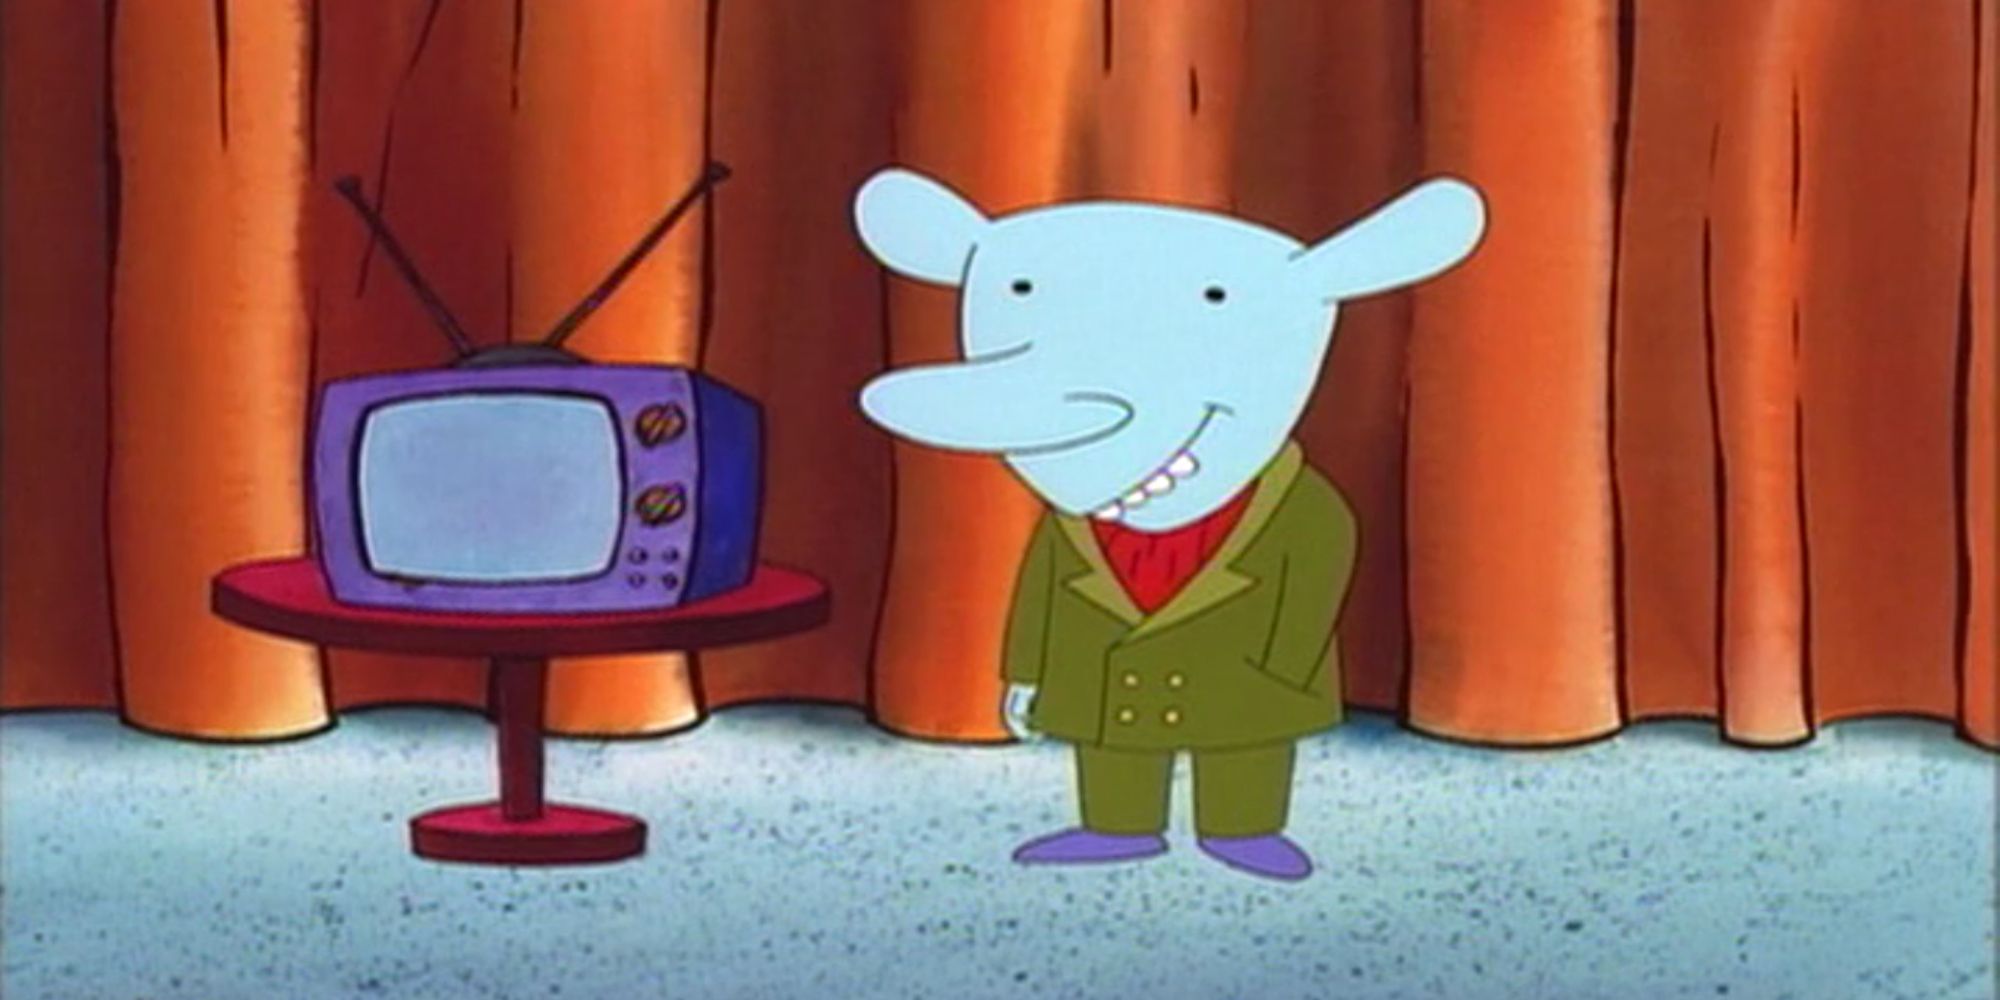 Winslow from CatDog standing next to a small TV and wearing a green suit